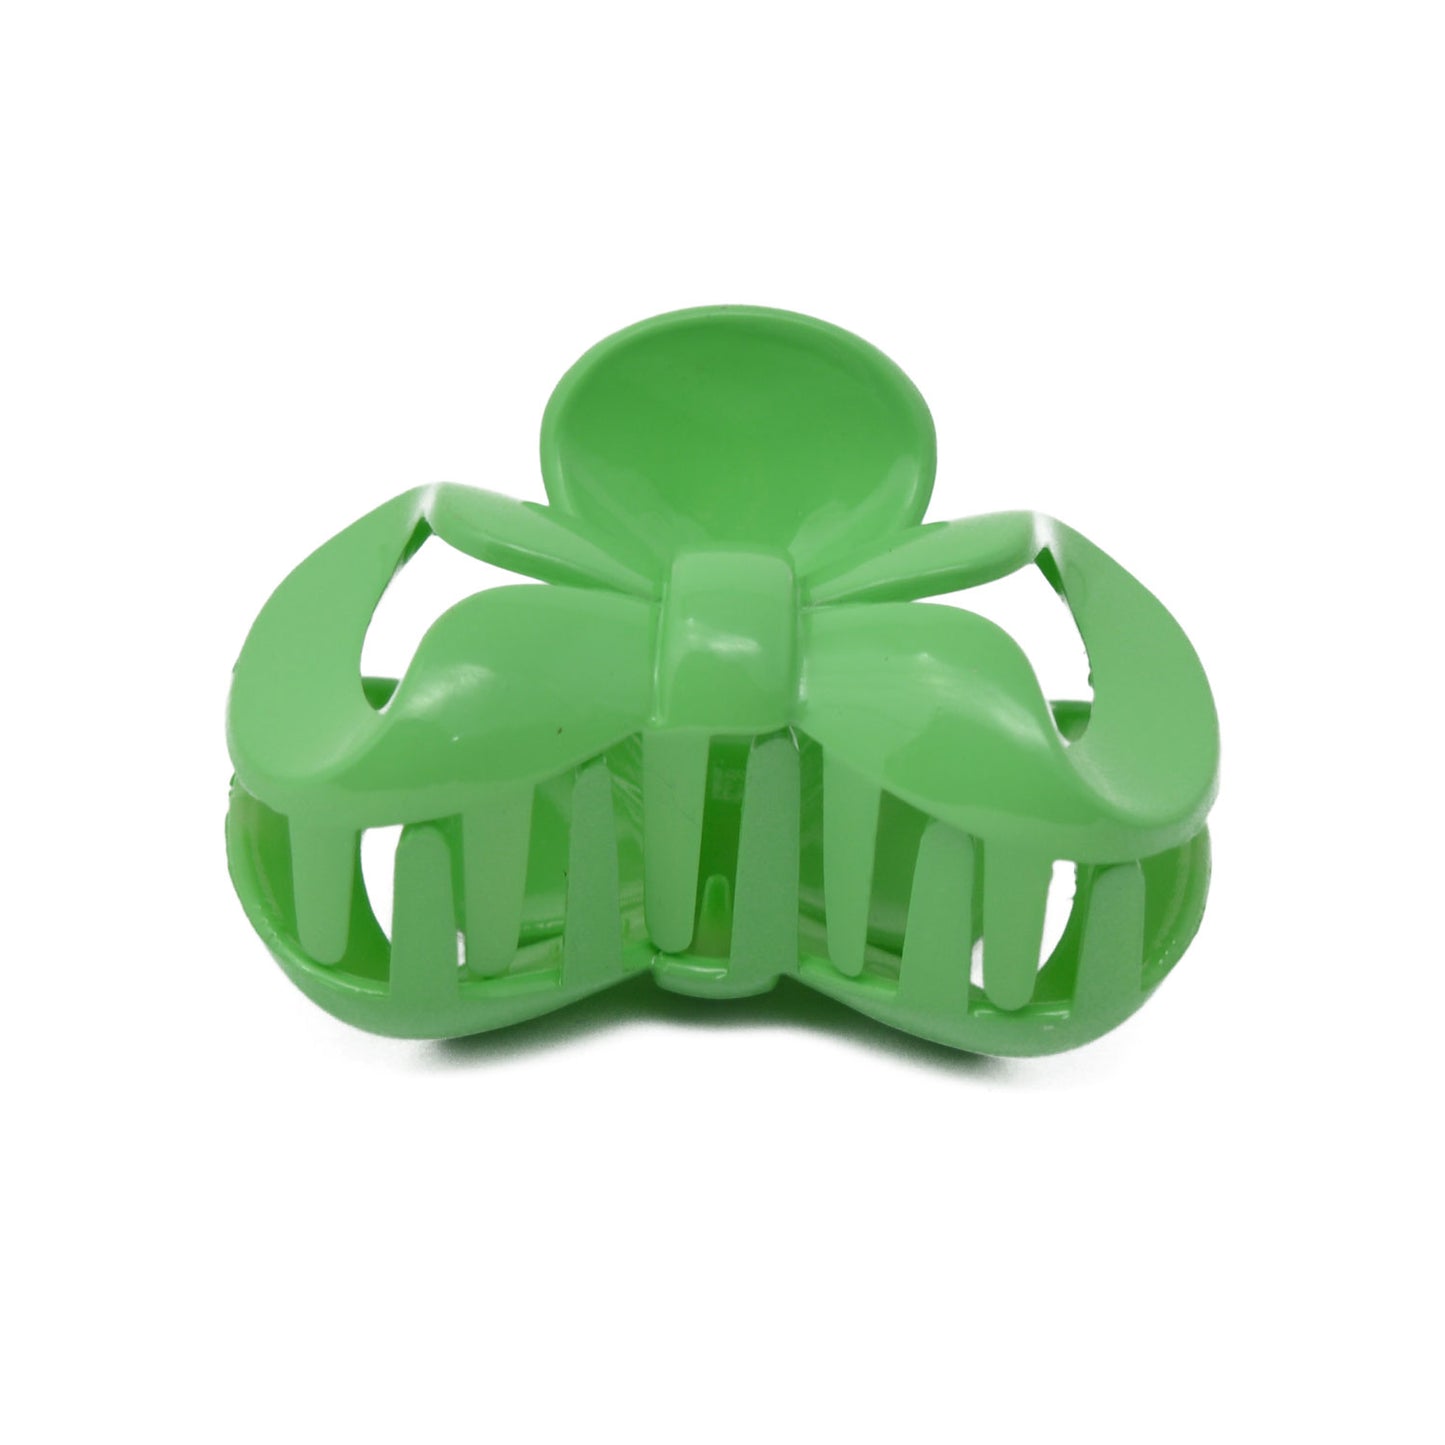 Bow Hair Claw / Clutcher for Girls and Women (Green) - 029